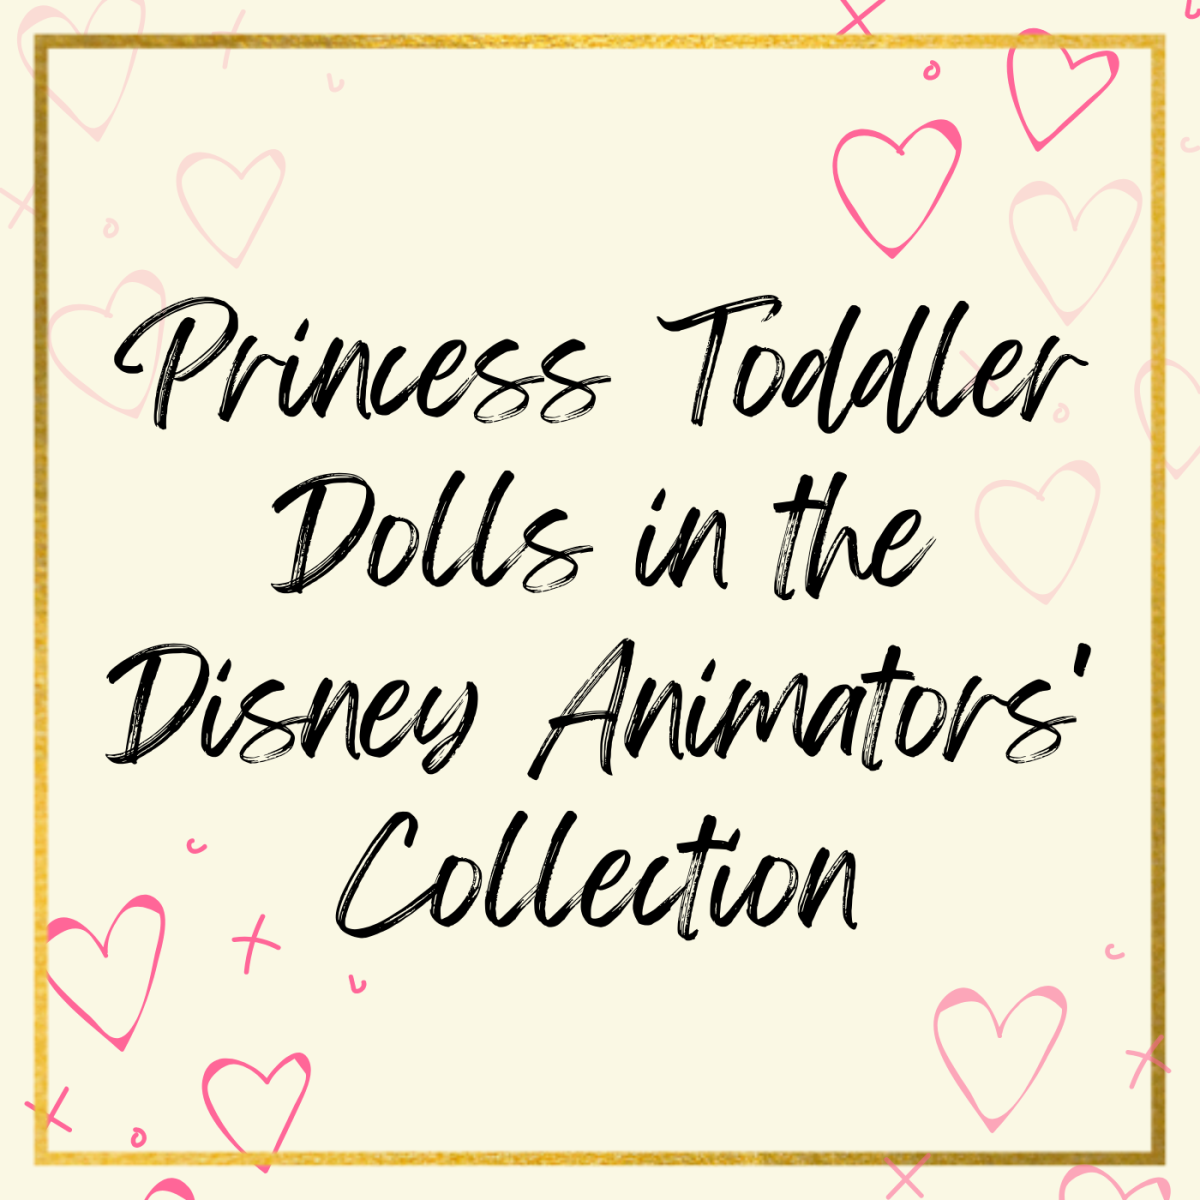 Meet the toddler versions of your favorite Disney Princesses (and a few princes) in the adorable Animators' Collection.